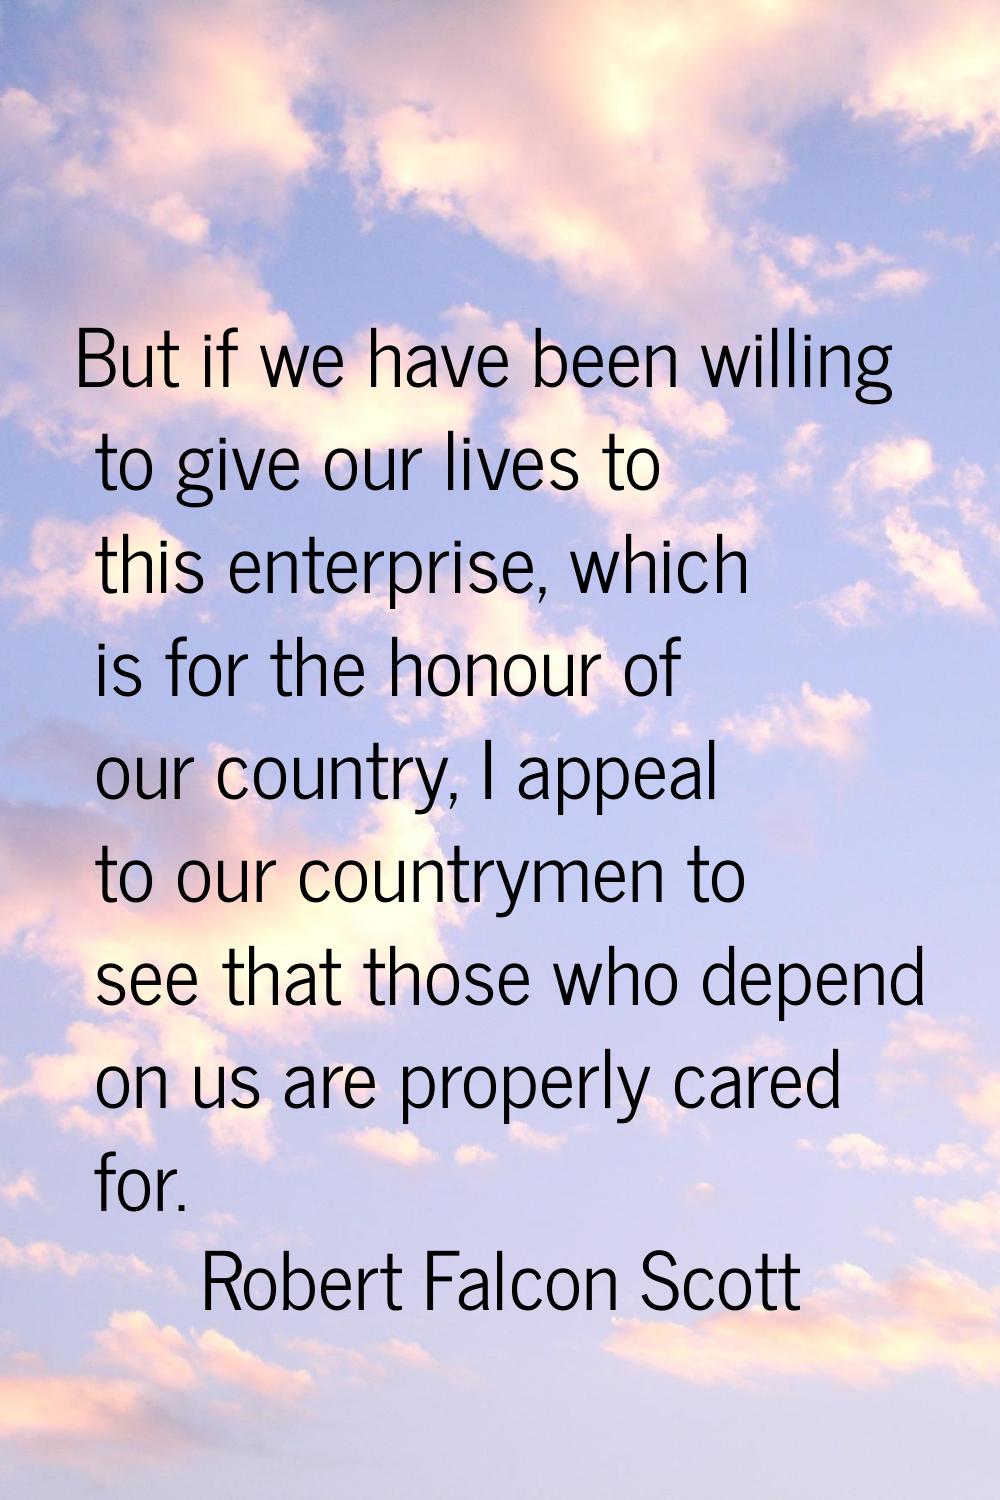 But if we have been willing to give our lives to this enterprise, which is for the honour of our co